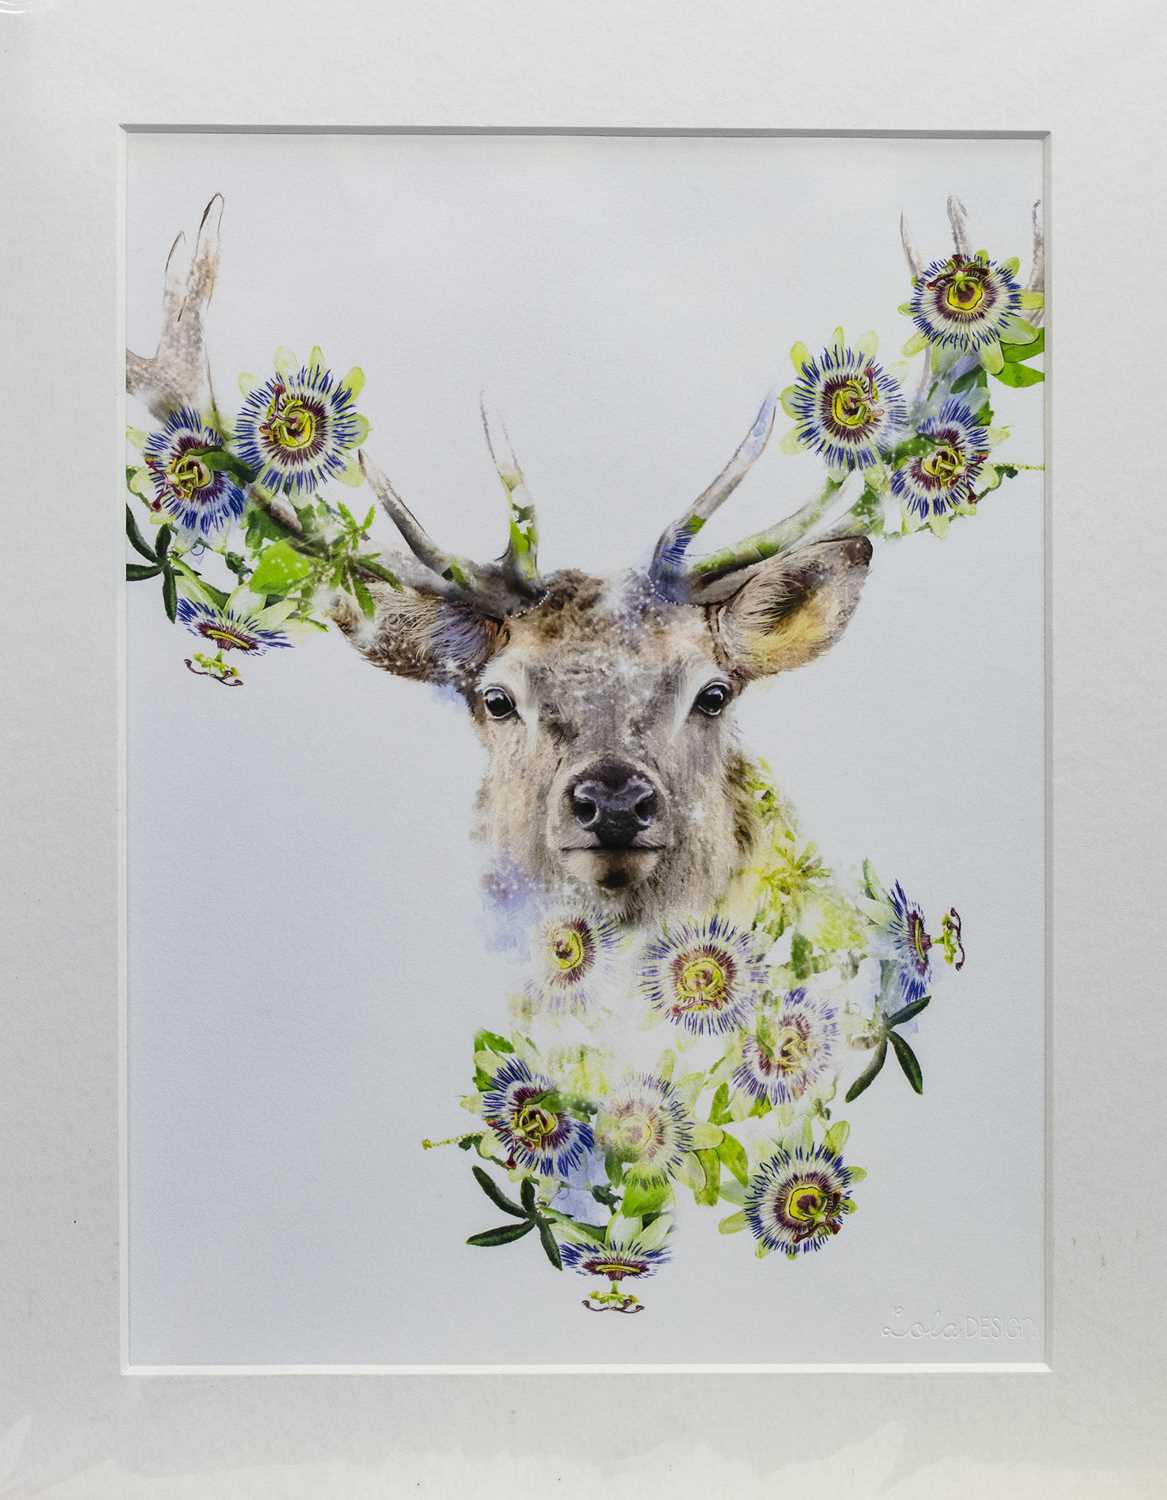 Lot 484 - STAG, A PRINT BY LOLA DESIGNS